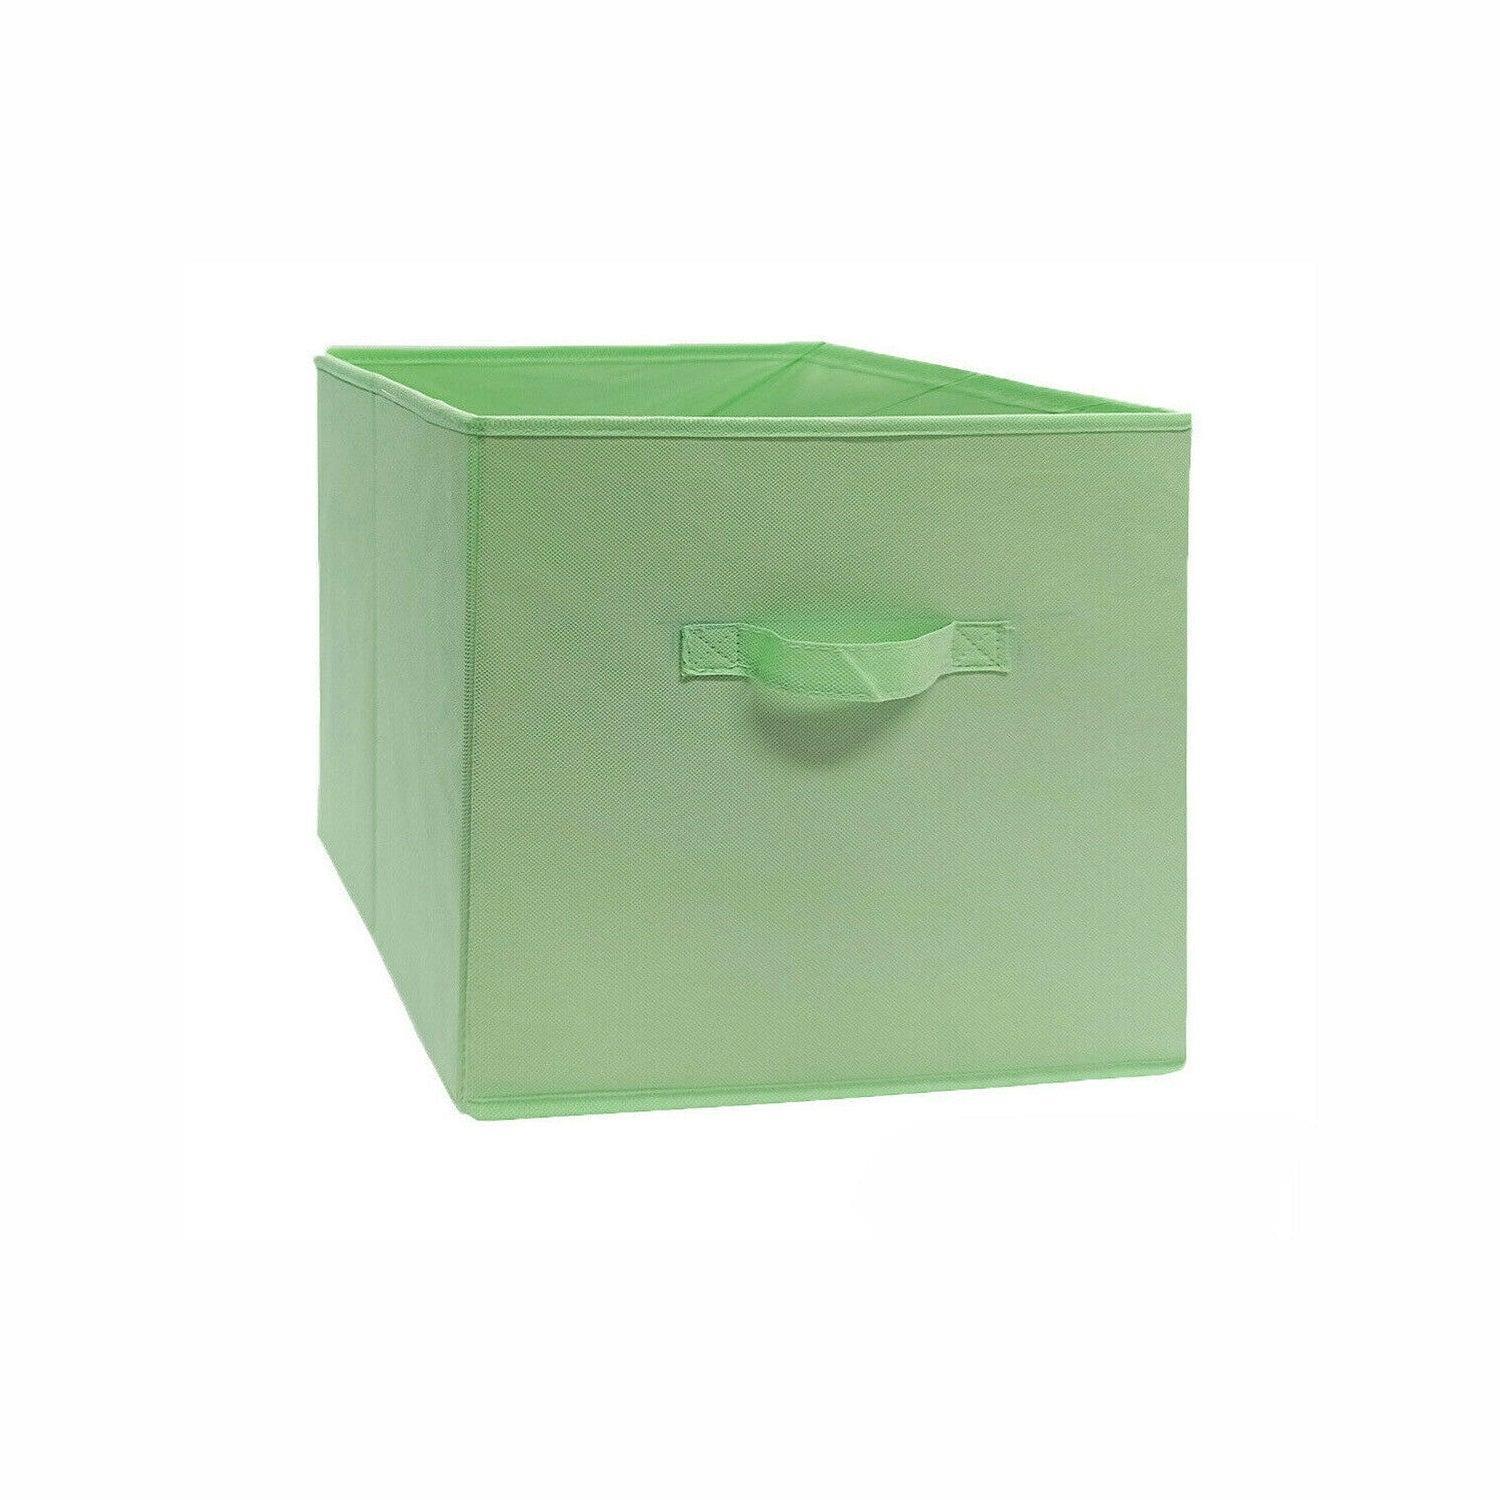 Foldable Folding Storage Cube Storage Box Fabric Organiser Available in 10 Colours